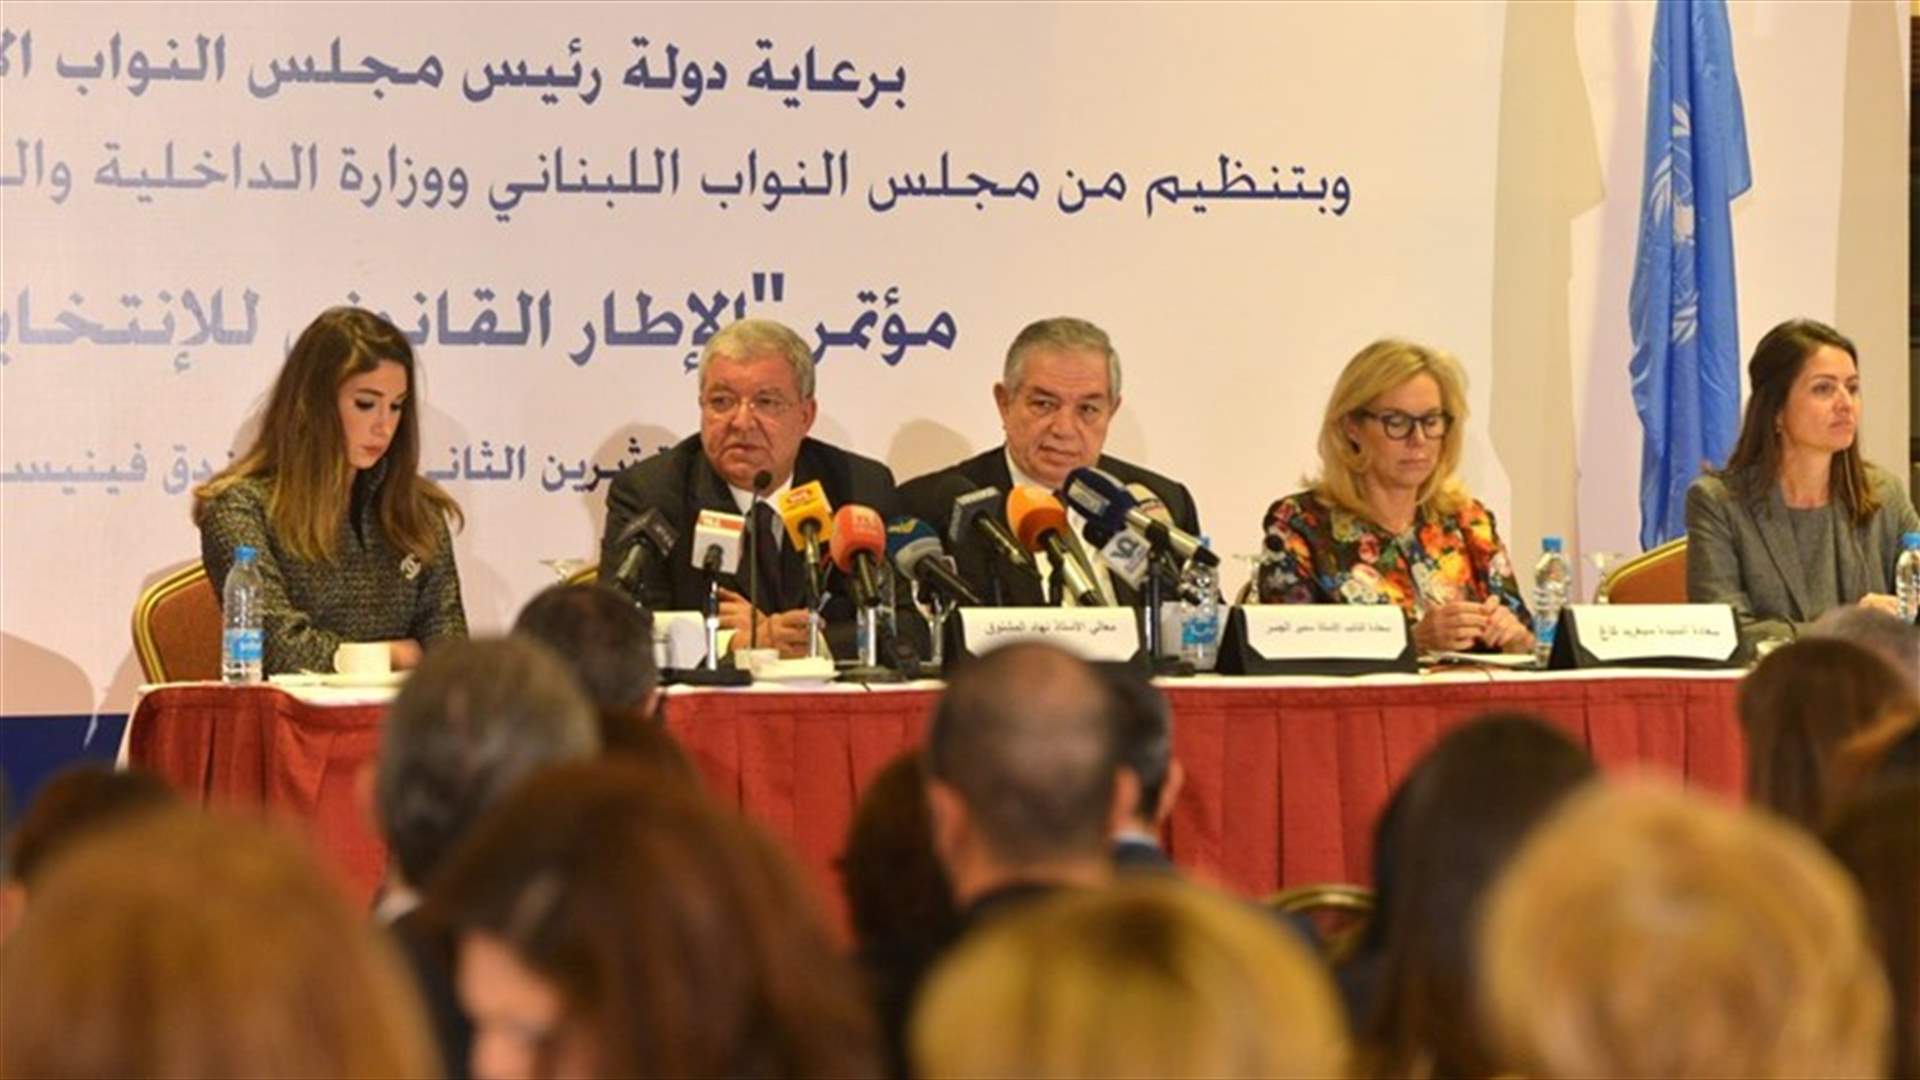 Mashnouq says Interior Ministry ready to hold parliamentary elections according to 60s law